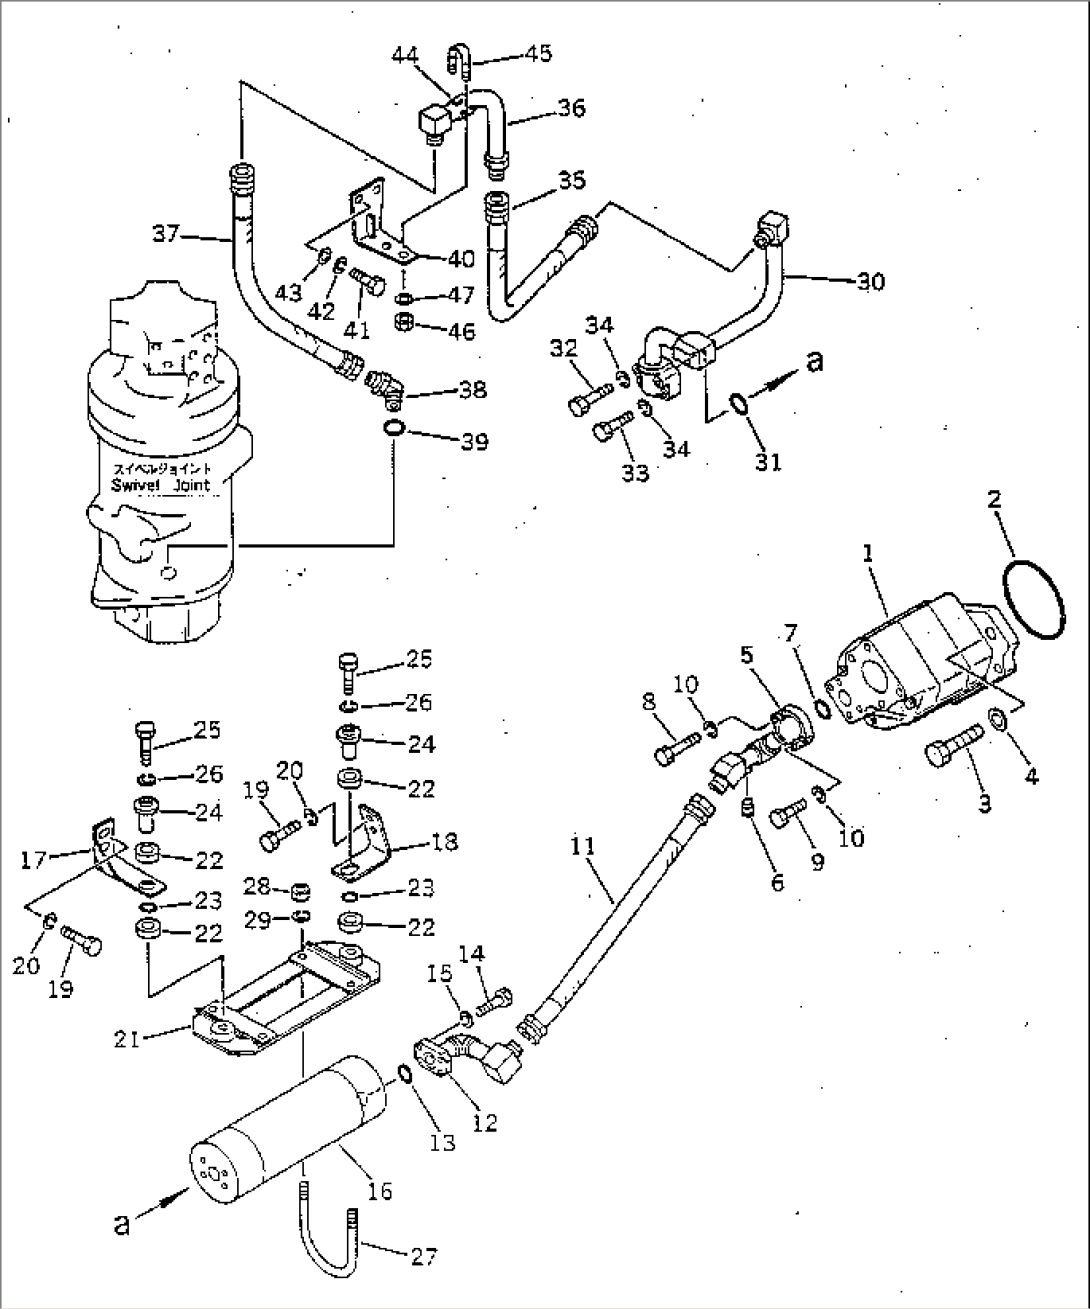 HYDRAULIC PIPING (BOOM PUMP TO SWIVEL JOINT)